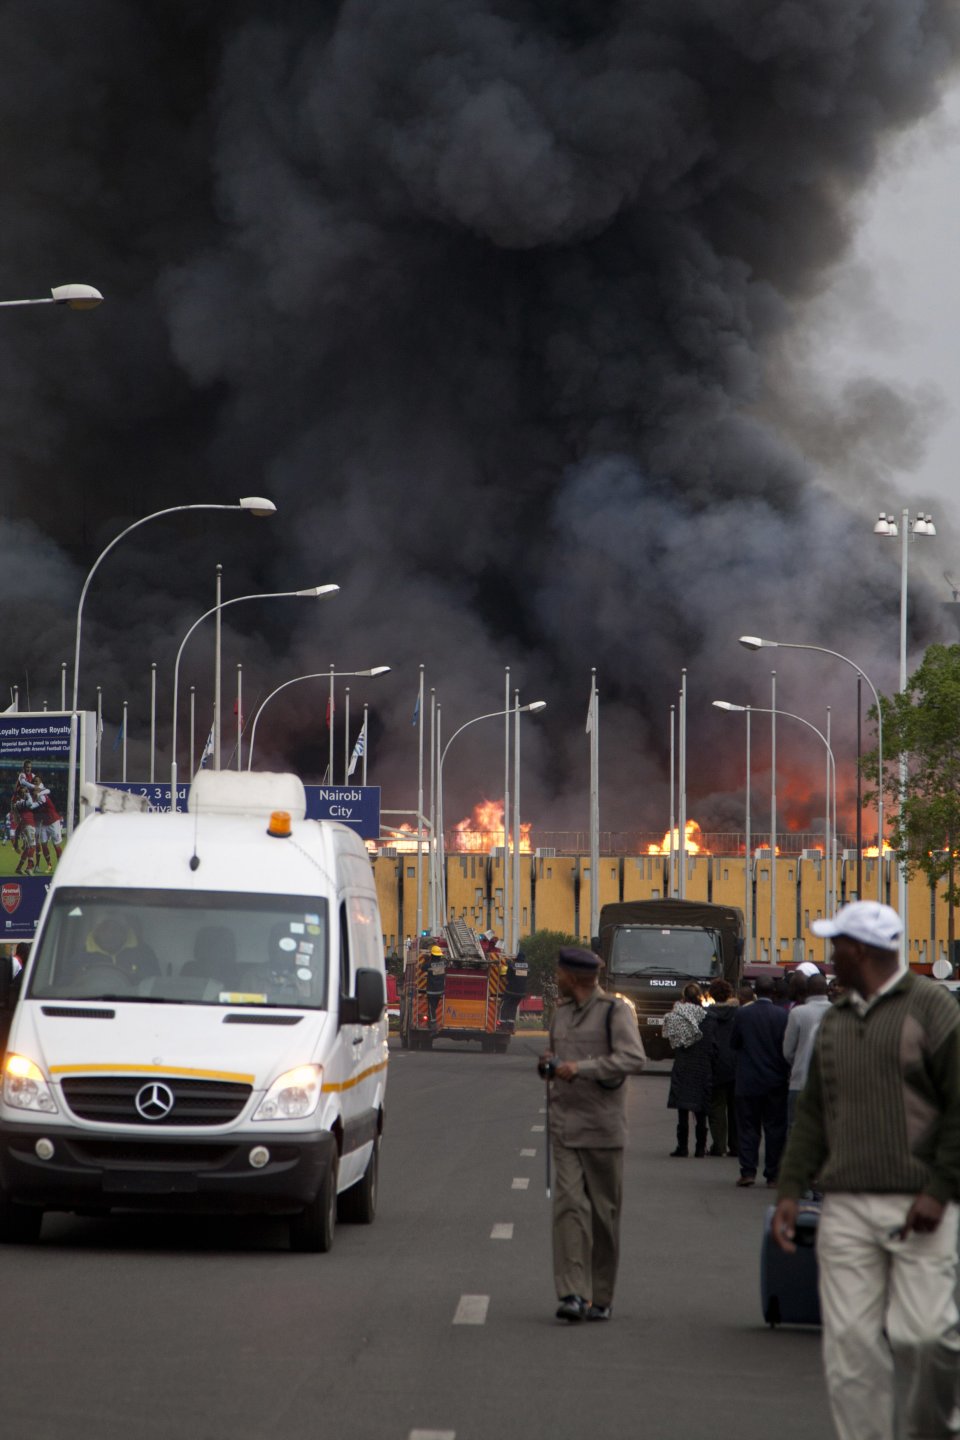 A policeman stands guard as a fire engulfs the International arrivals hall at the Jomo Kenyatta International Airport in Nairobi, Kenya Wednesday, Aug. 7, 2013. The Kenya Airports Authority said the Kenya's main international airport has been closed until further notice so that emergency teams can battle the fire. (AP Photo/Sayyid Azim)